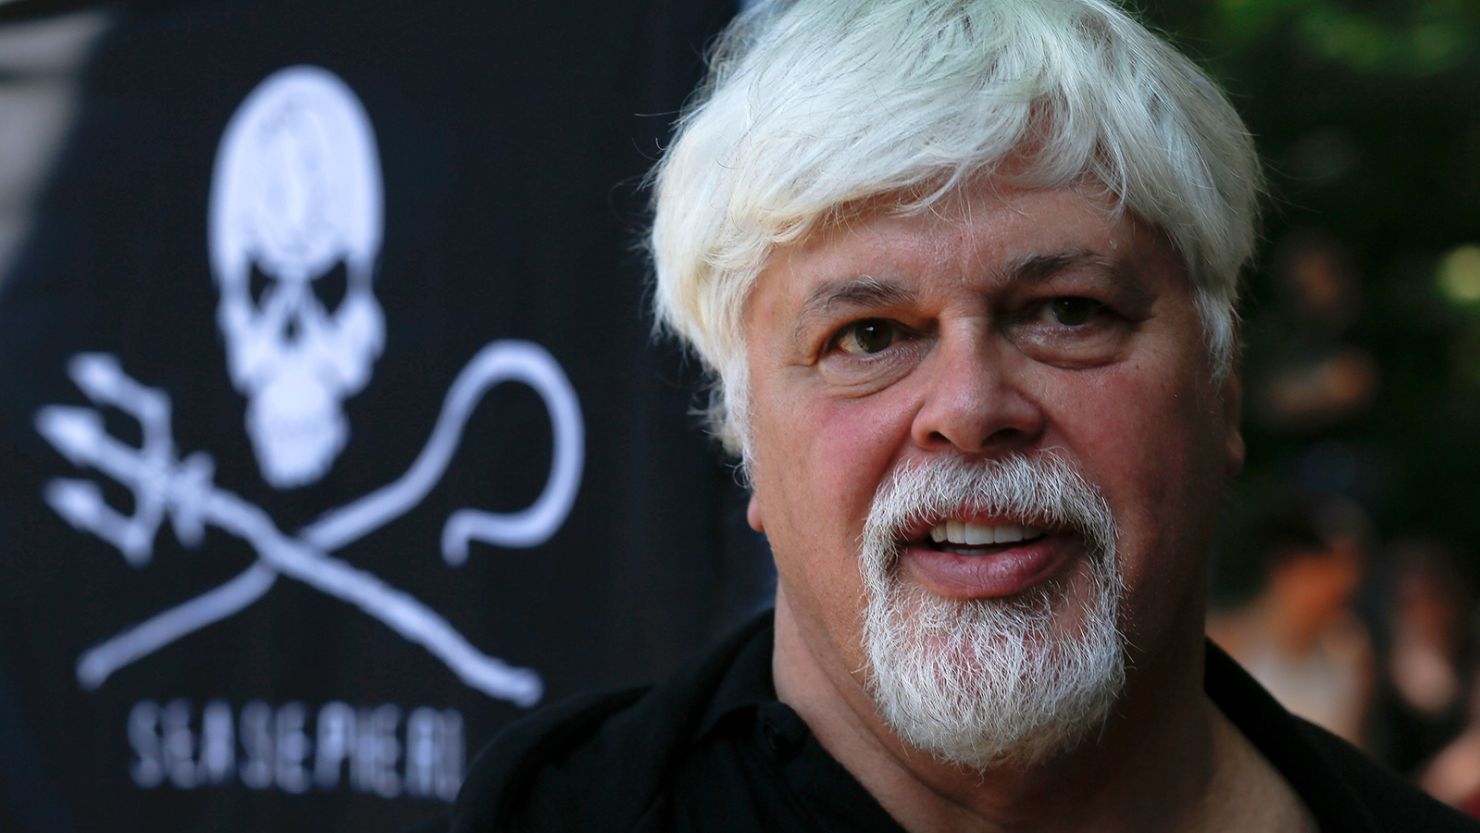 Paul Watson, then founder and President of the animal rights and environmental Sea Shepherd Conservation, in Berlin, Germany, on May 23, 2012.